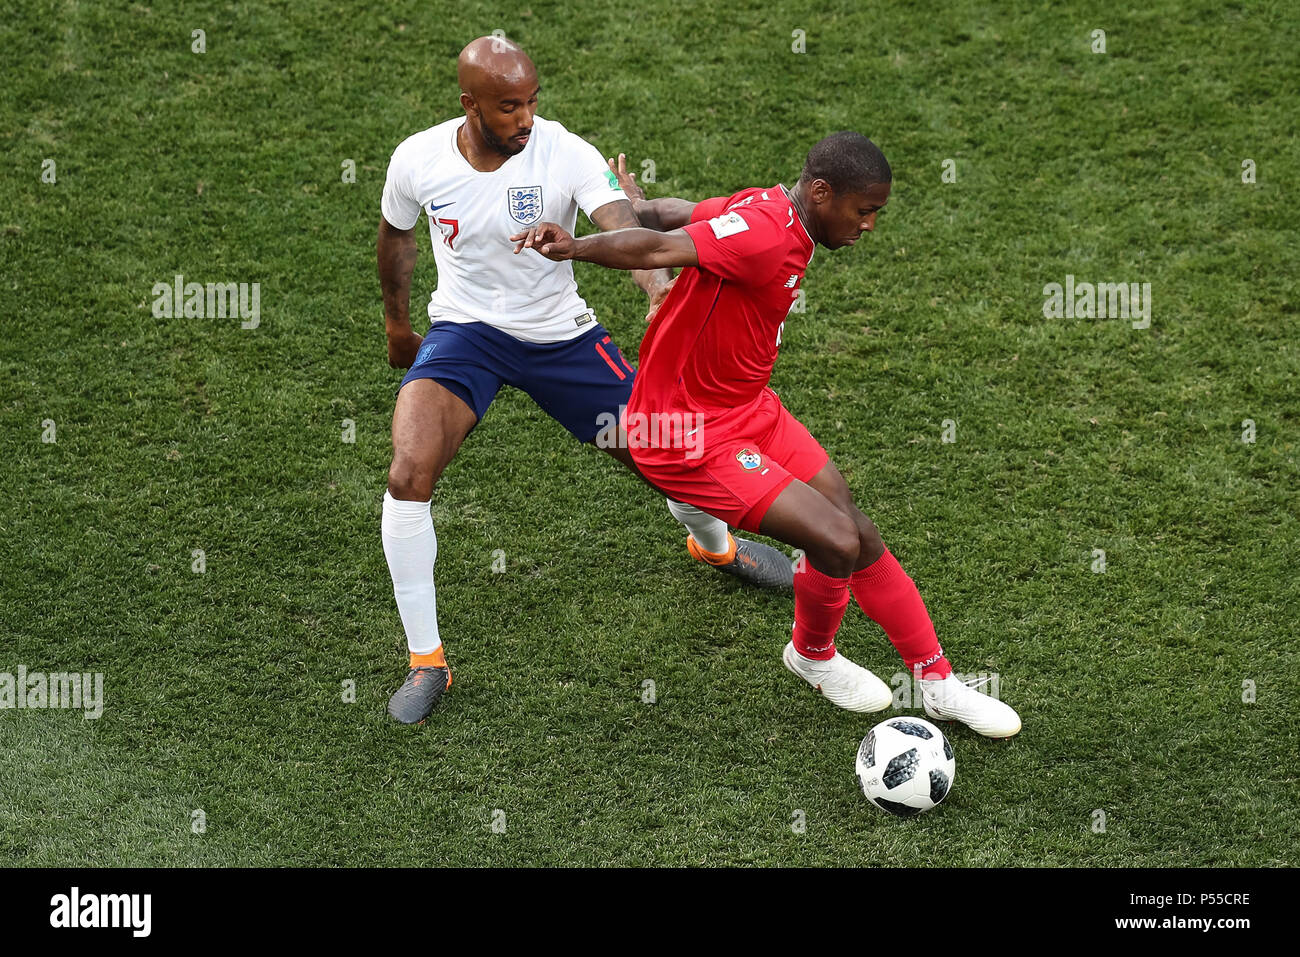 Fabian Delph of England and Armando Cooper of Panama during the 2018 FIFA World Cup Group G match between England and Panama at Nizhny Novgorod Stadium on June 24th 2018 in Nizhny Novgorod, Russia. (Photo by Daniel Chesterton/phcimages.com) Stock Photo